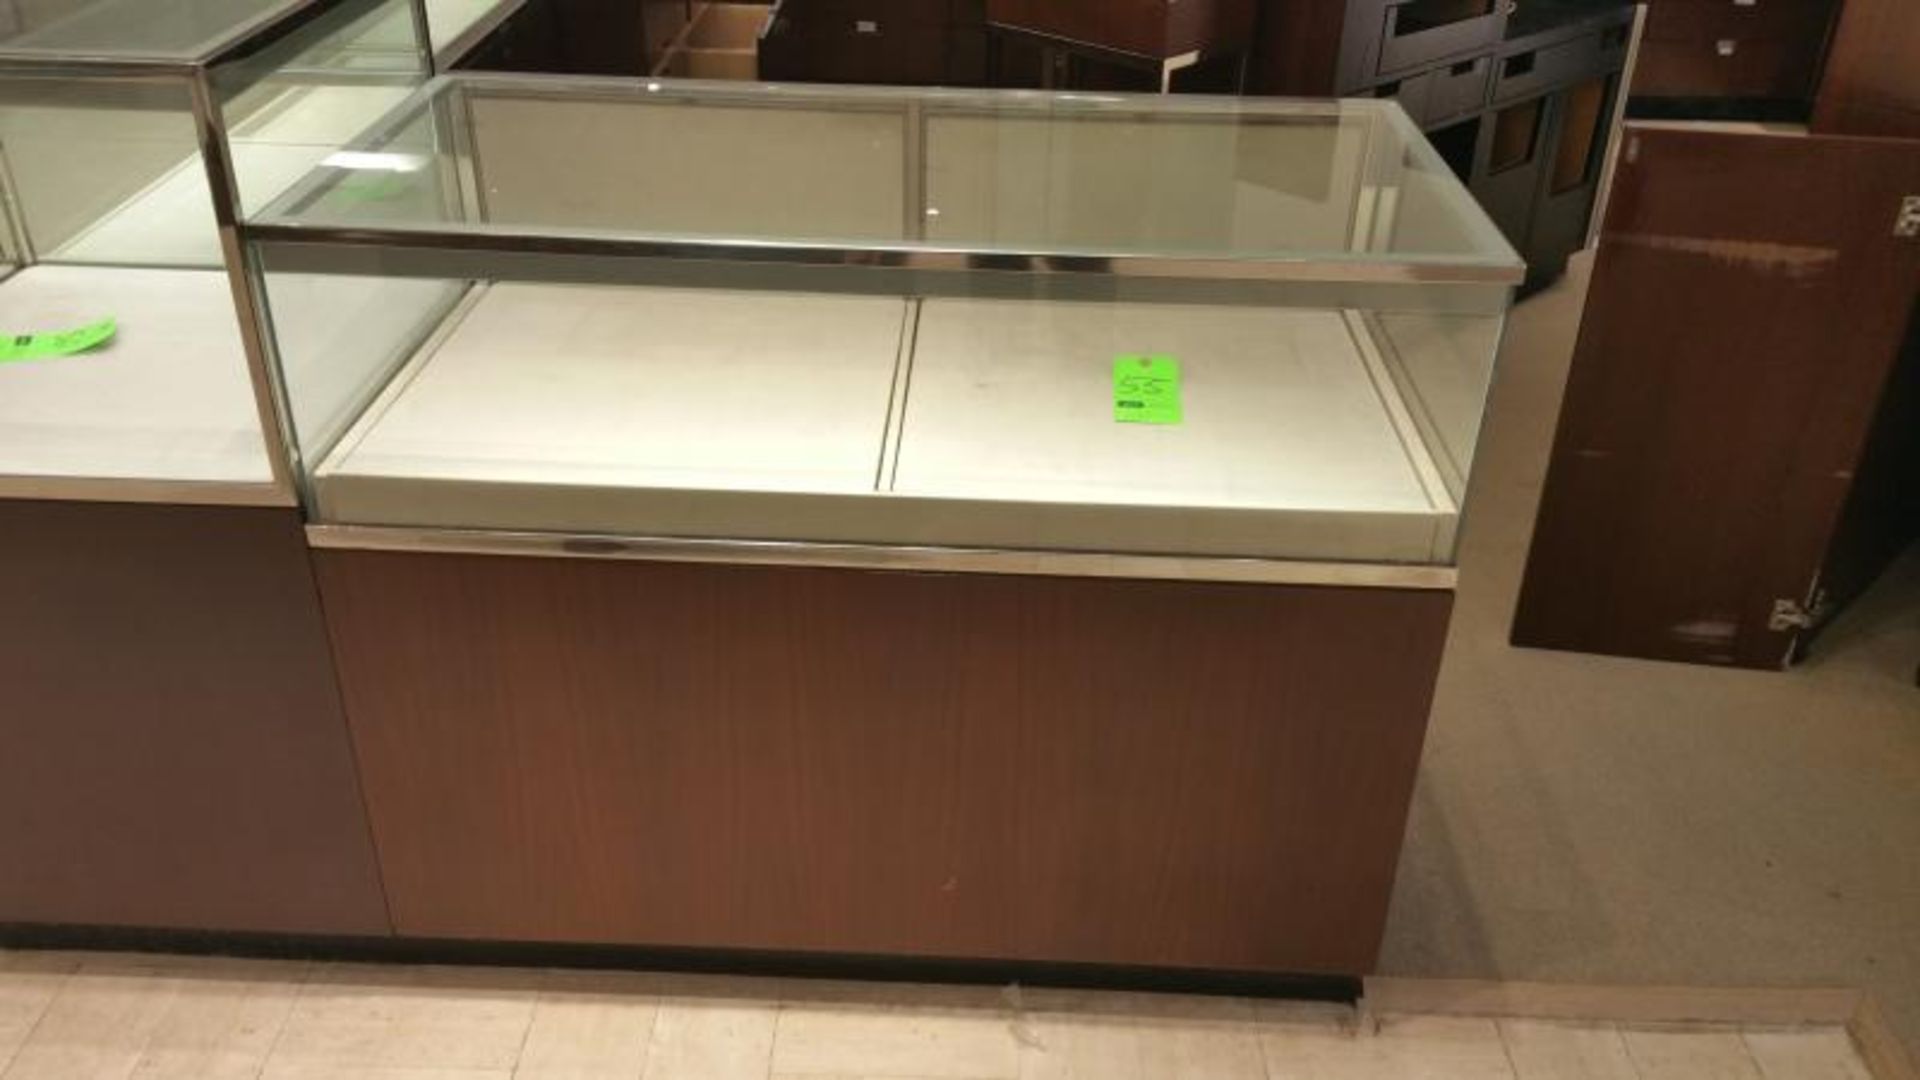 48” x 24” x 40” Cherry Single Felt Lined Shelf Display with Lighting and (4) drawers Rigging - Image 2 of 2